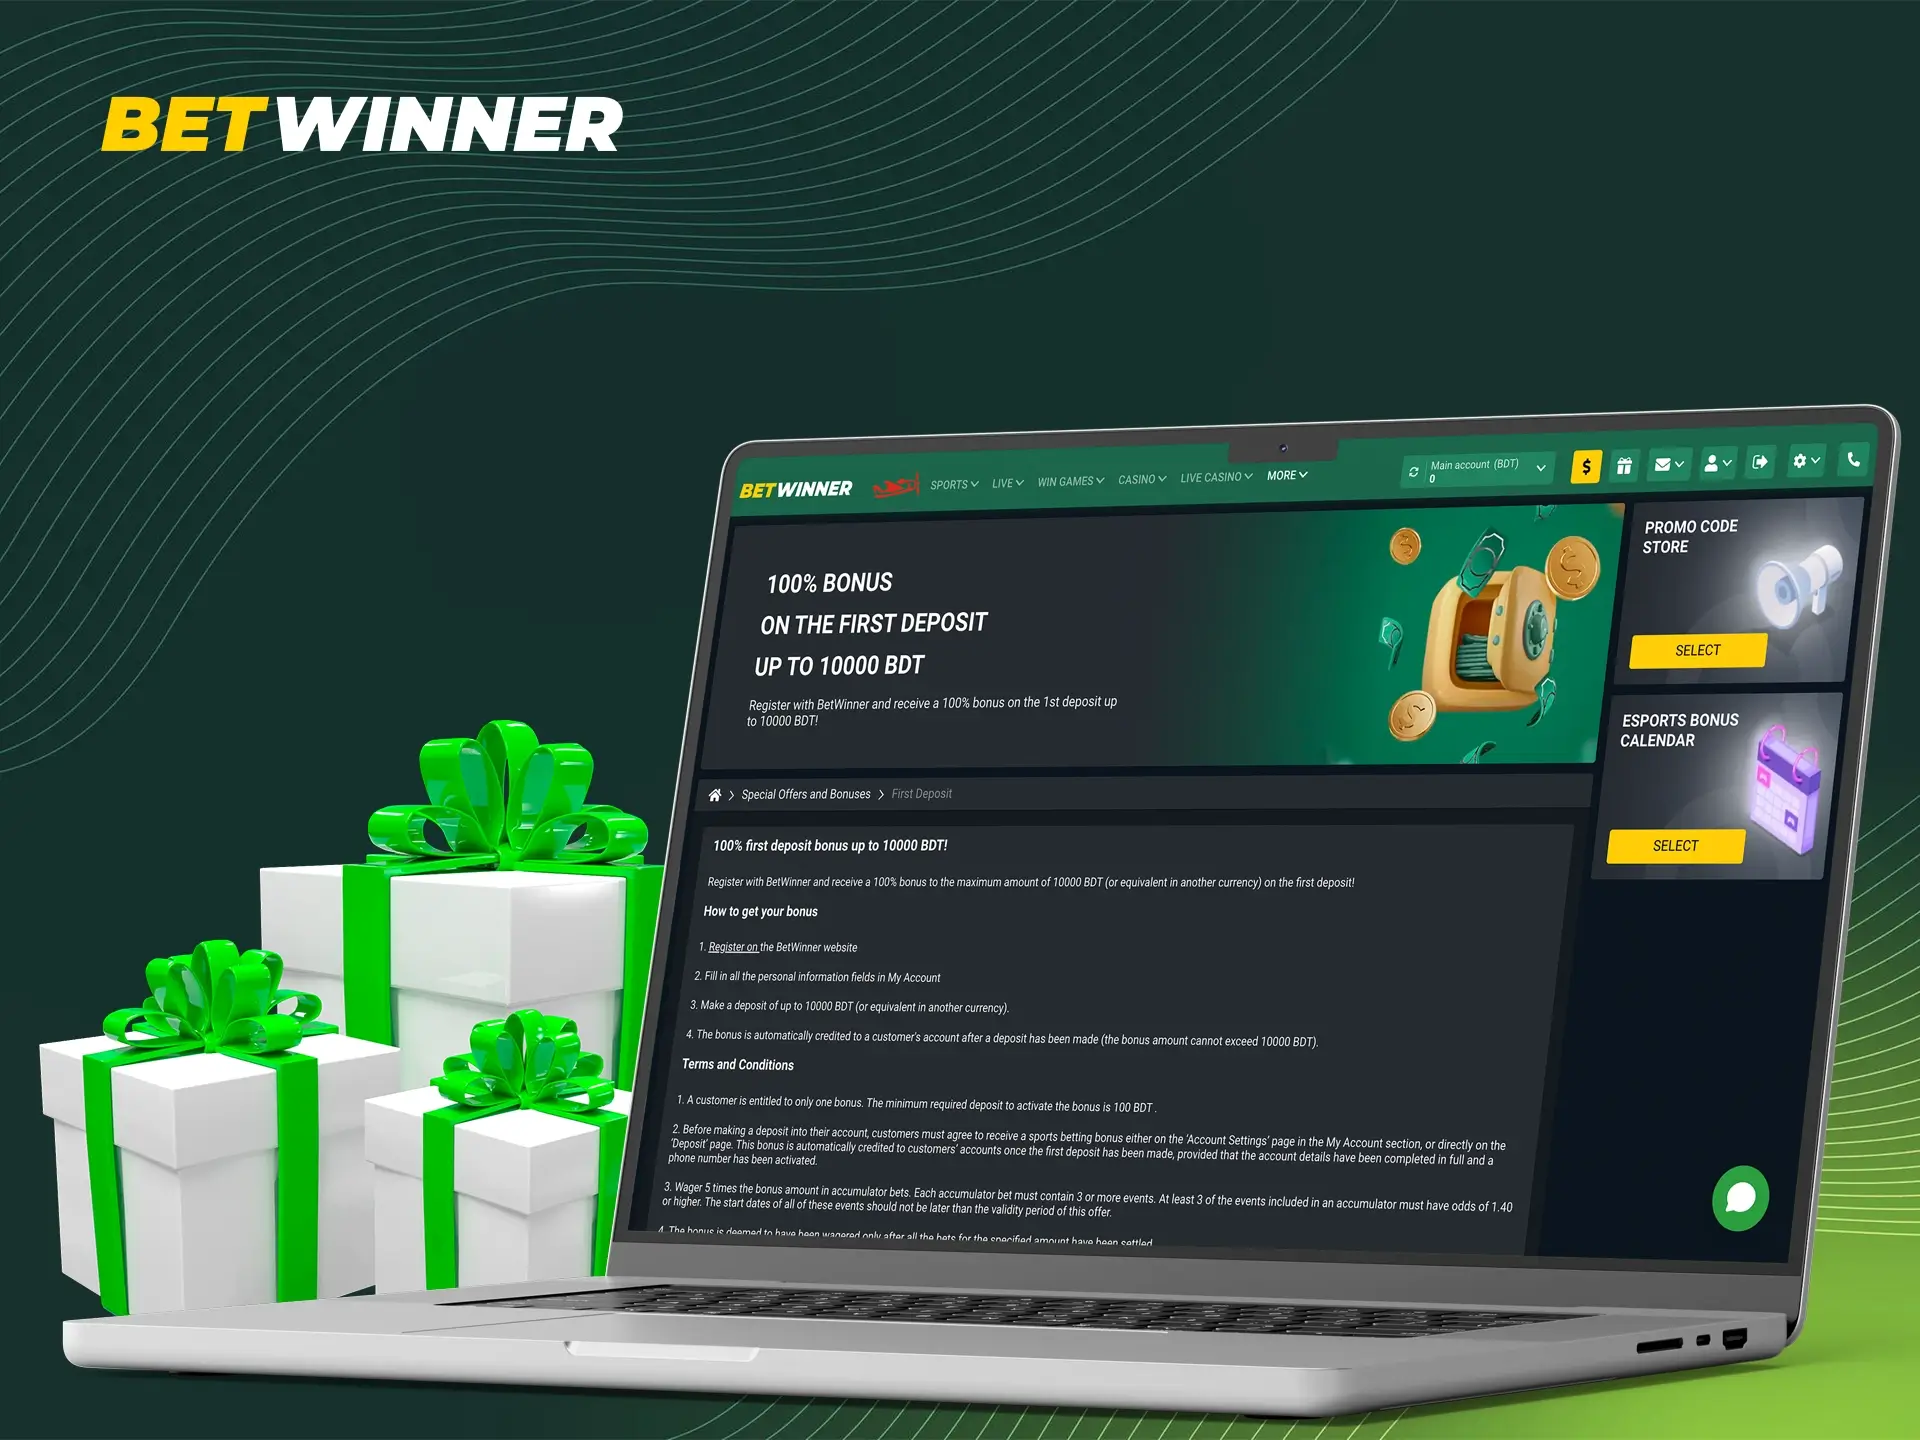 To increase your level of play Betwinner has a good offer as a beginners bonus.